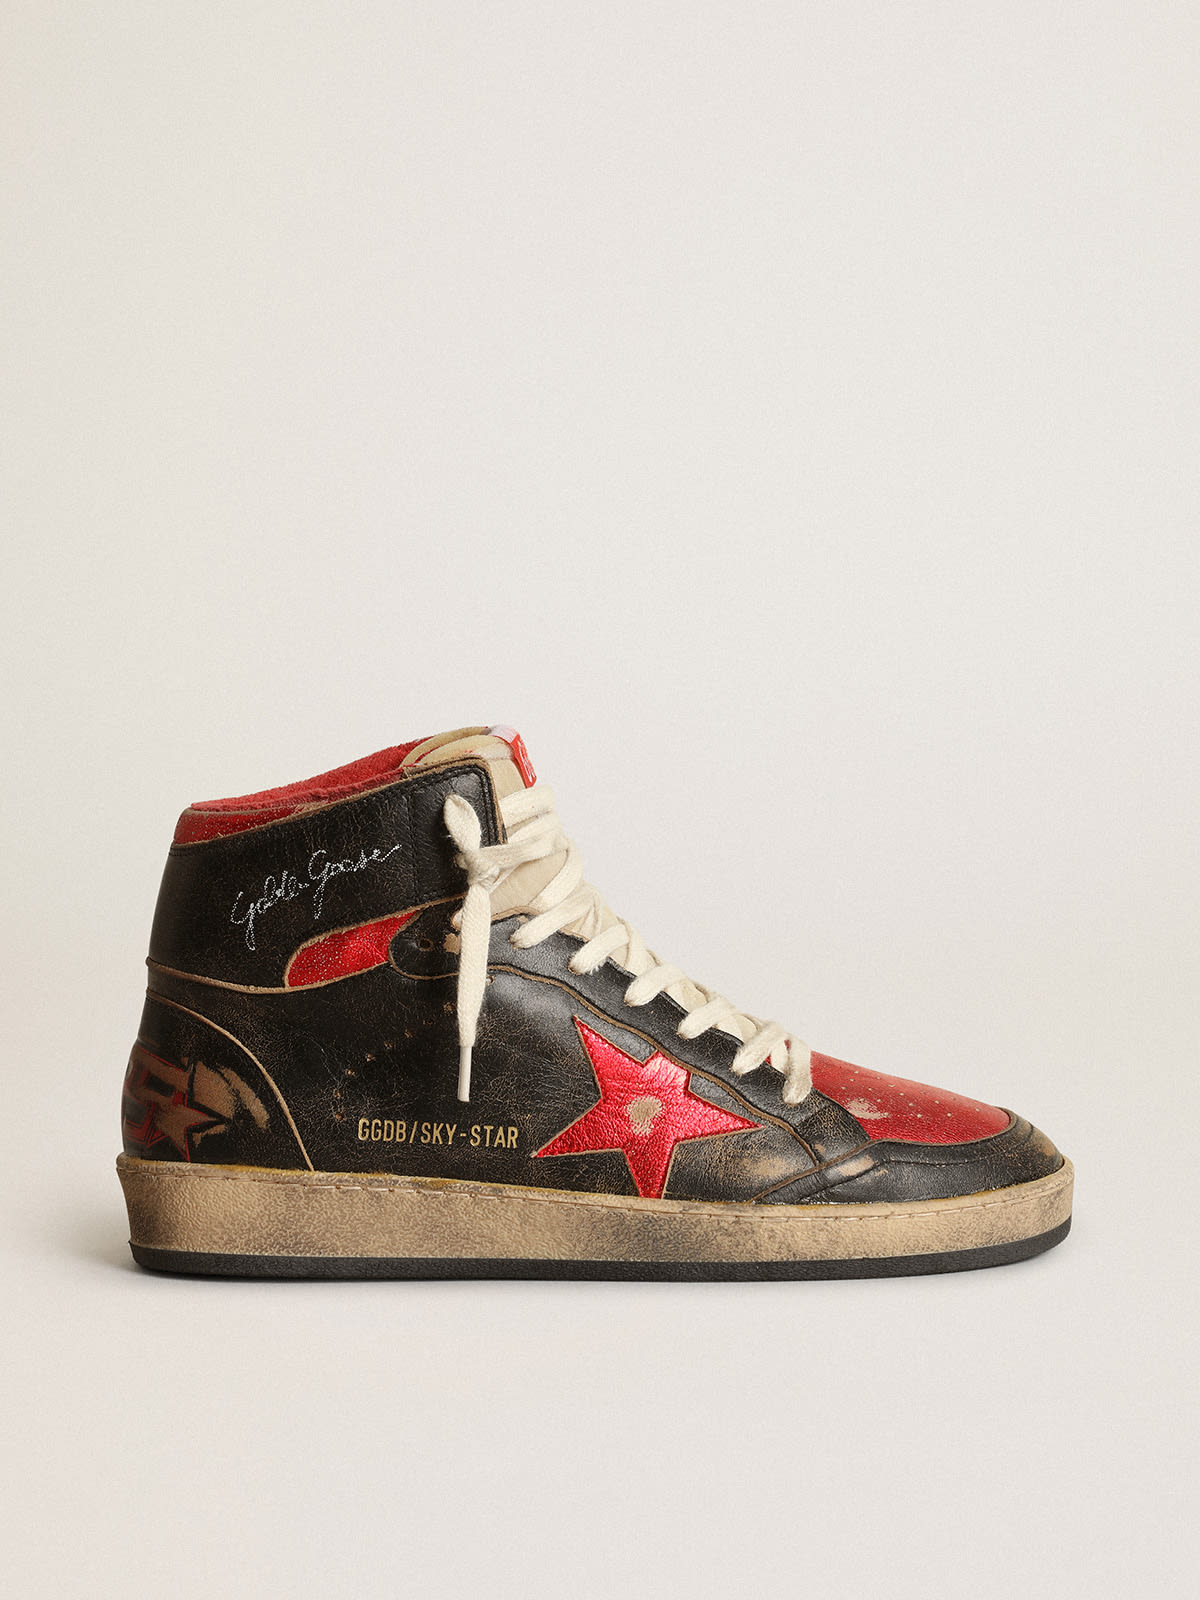 Women's Sky-Star in black glossy leather with red star | Golden Goose